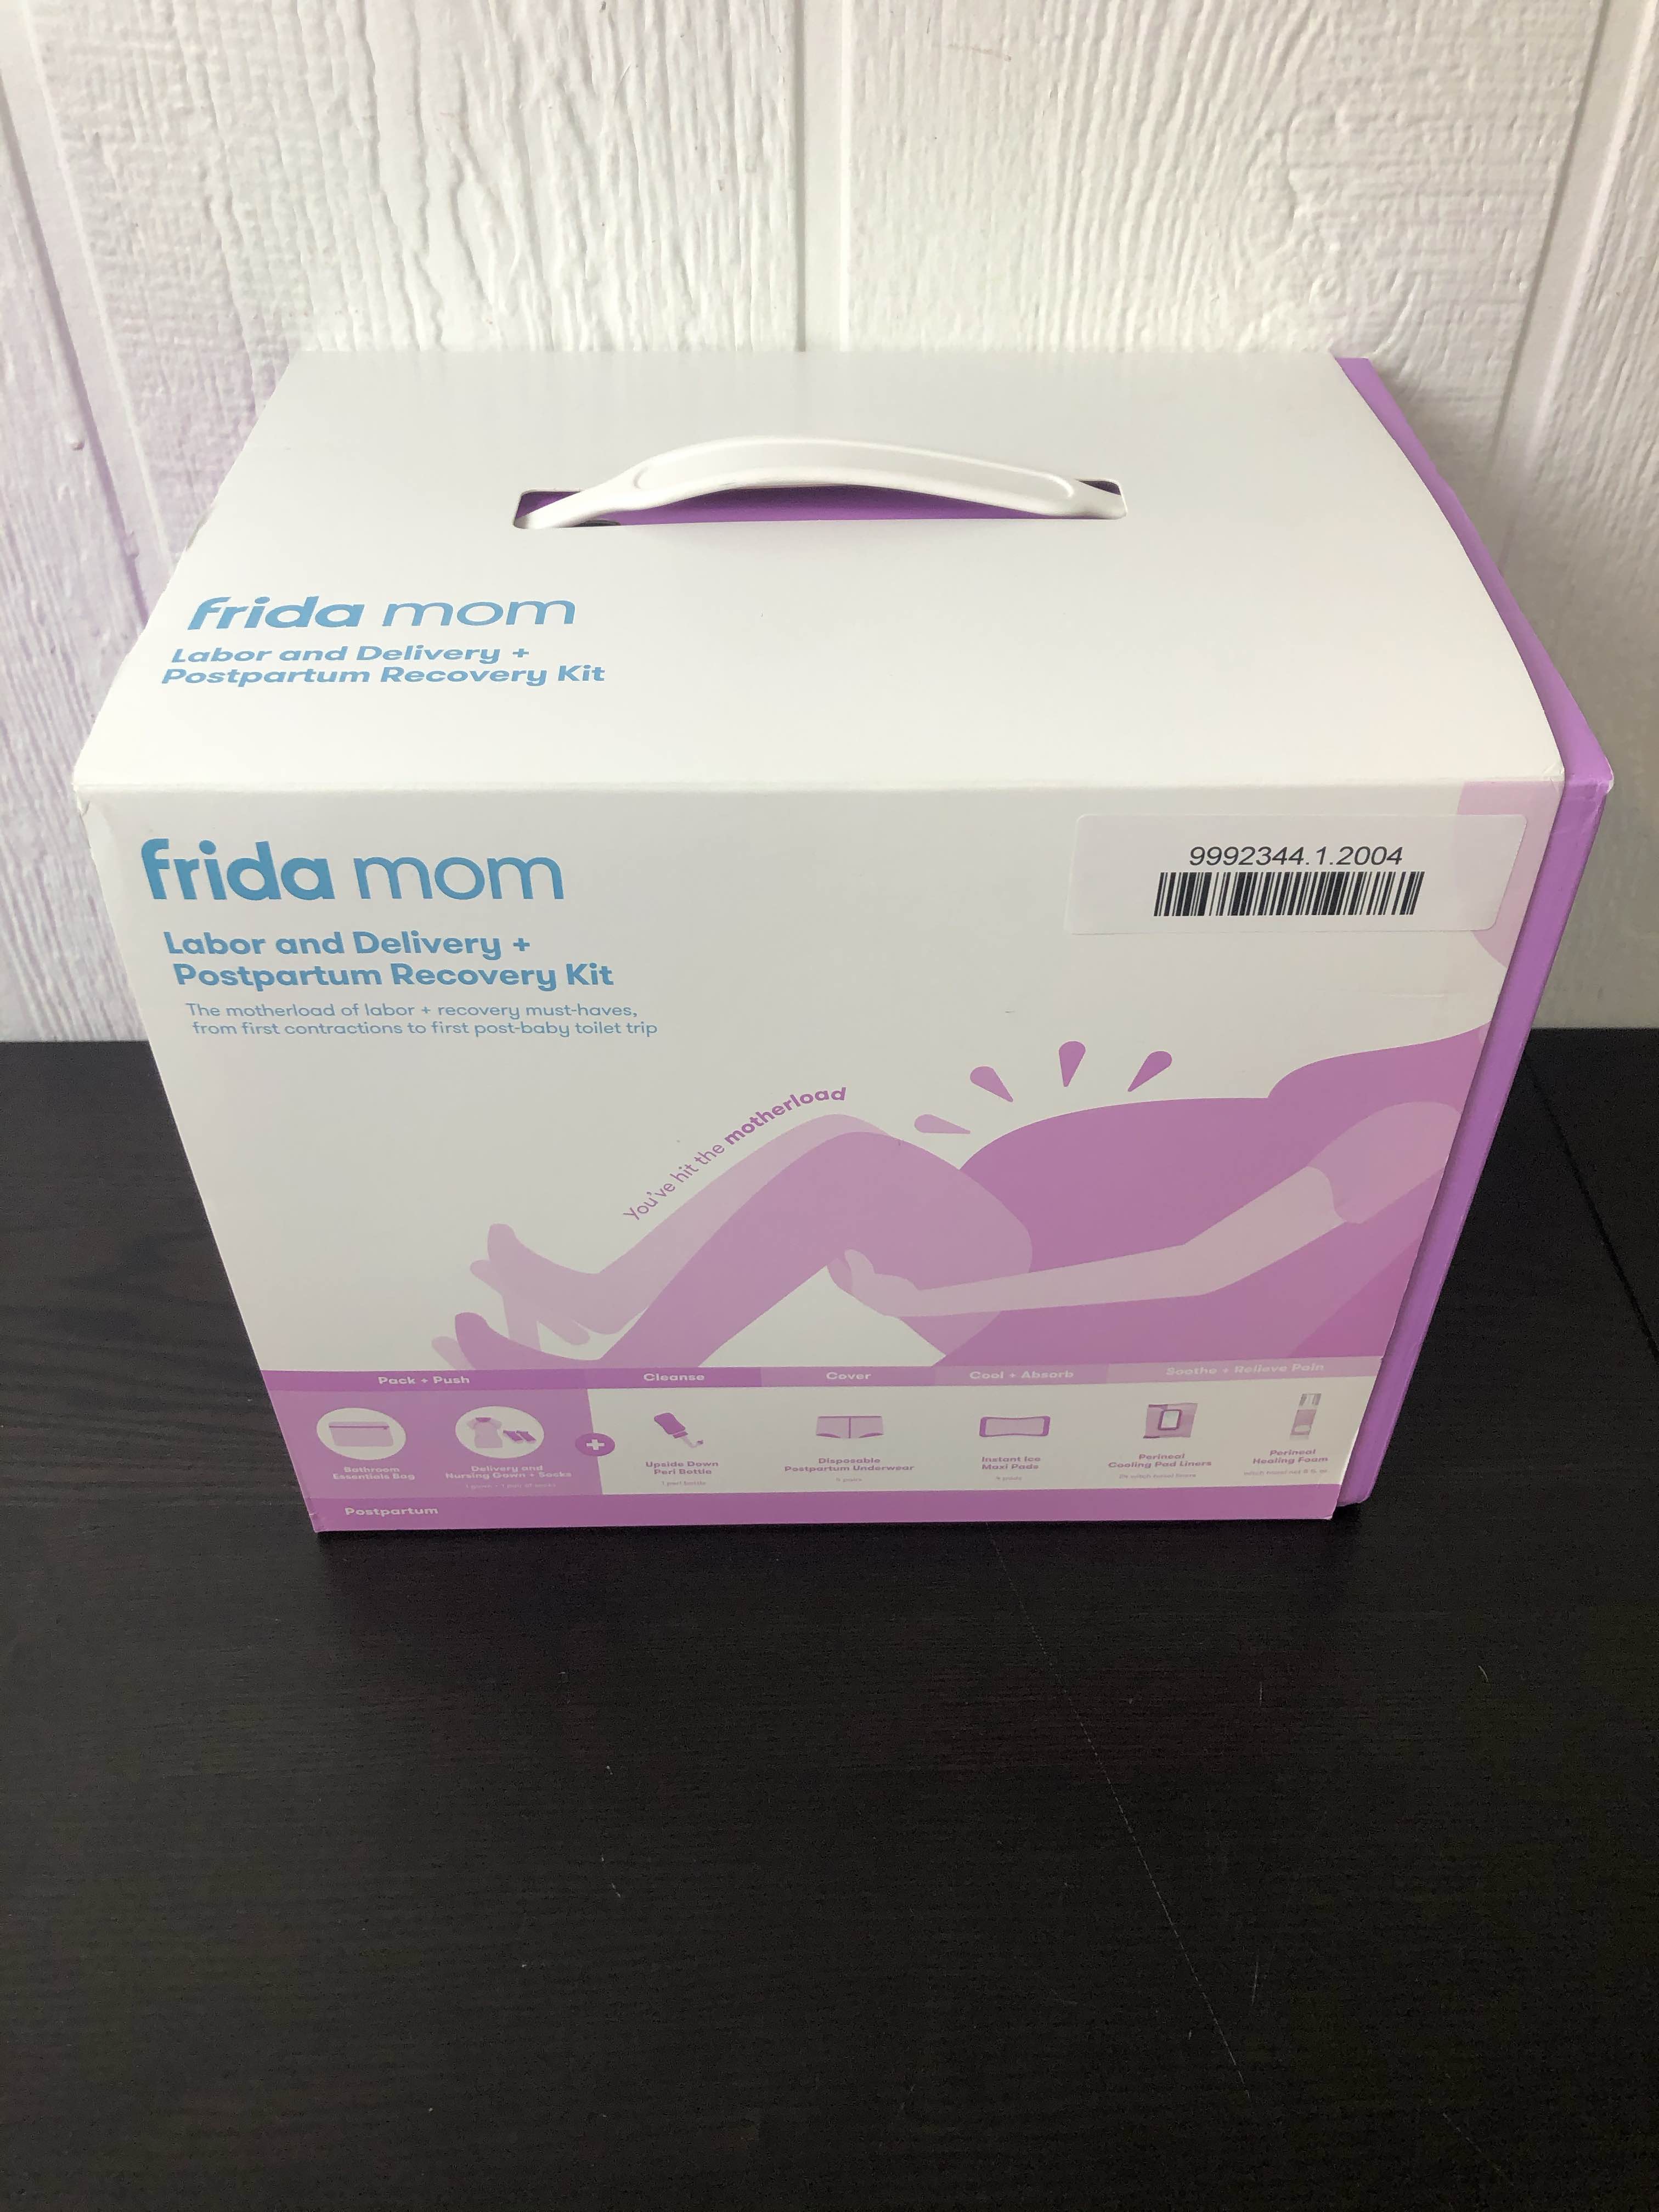 Frida Mom Labor and Delivery + Postpartum Recovery Kit (open box